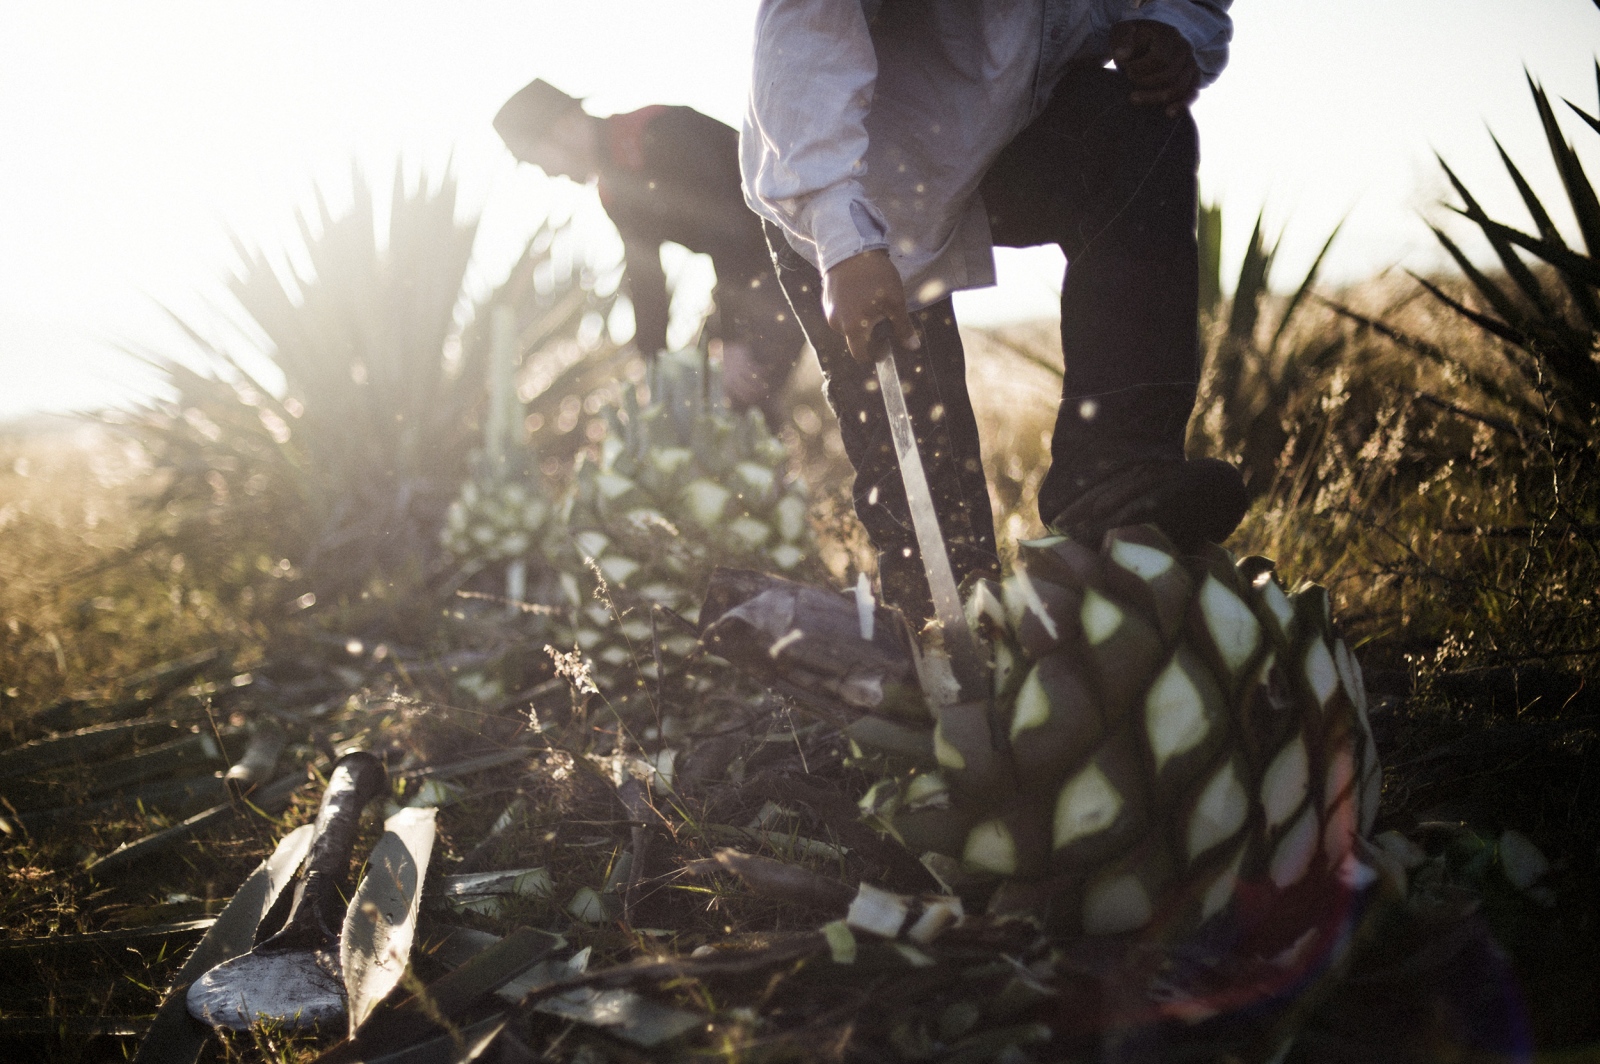 Agave, Corazón de México - Workers use machetes to harvest agave in the fields near...